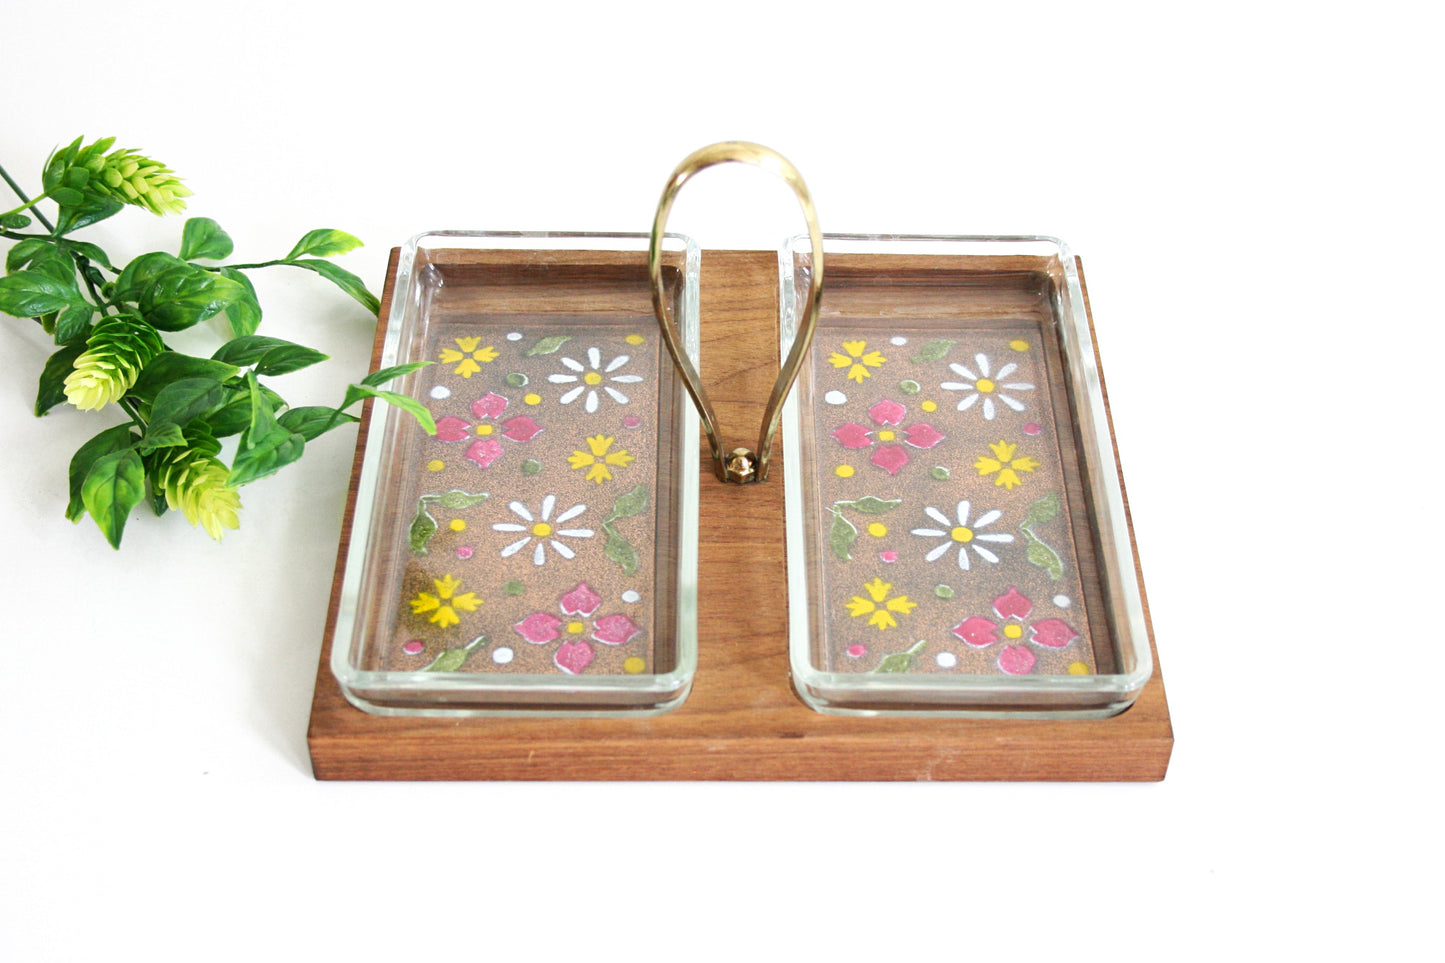 SOLD - Mid Century Modern Wood and Enameled Copper Serving Tray by Ernest John